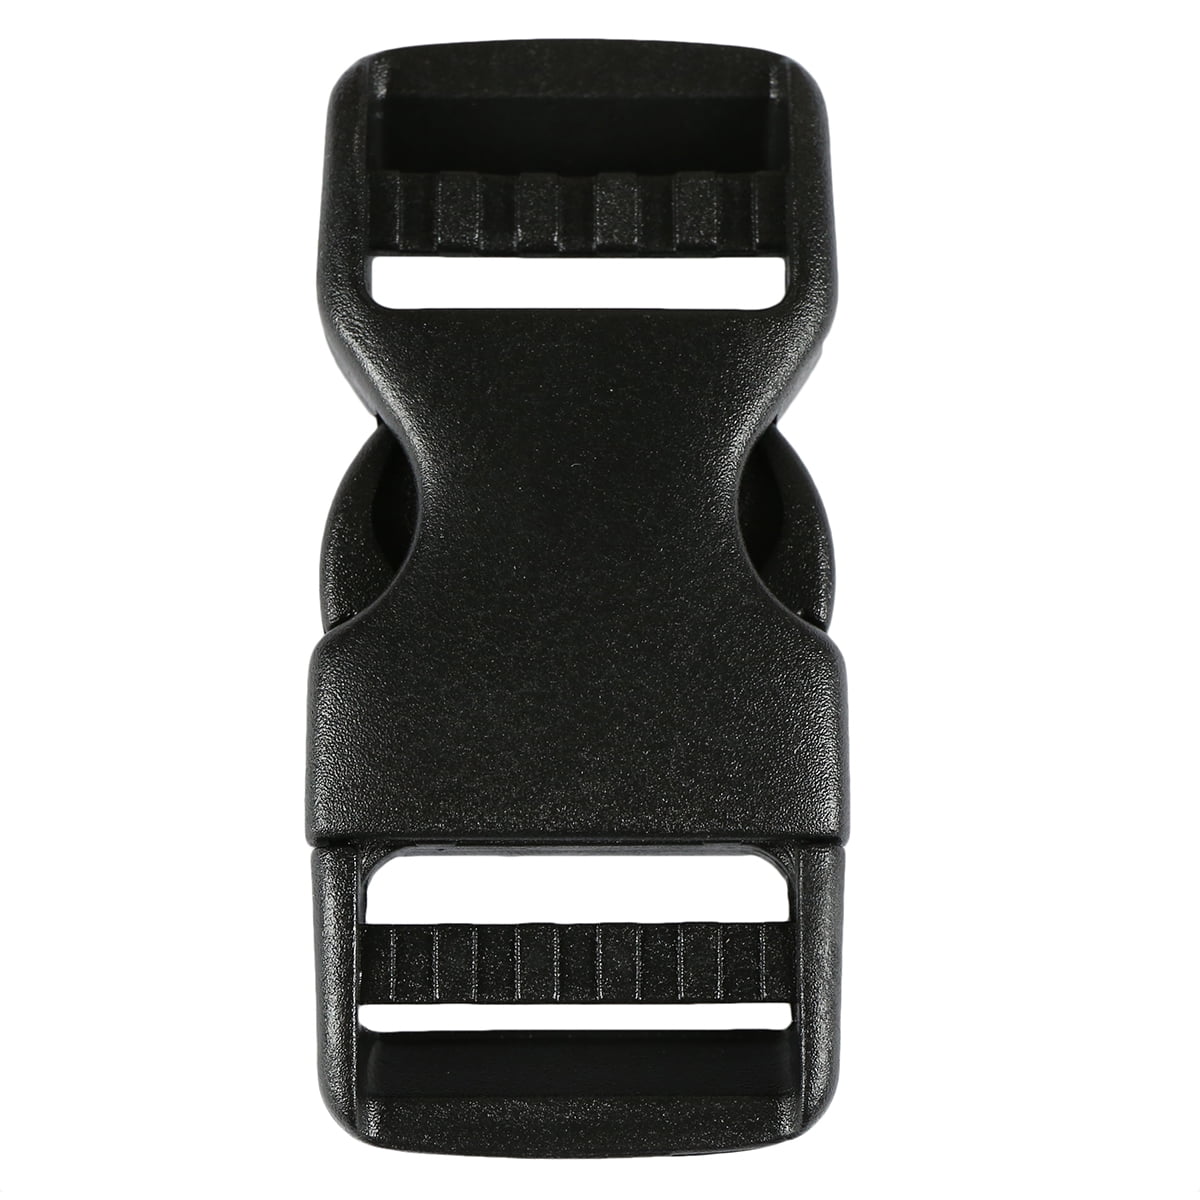 2 Side Release Buckle Pack Plastic Black Buckles for Nylon Web Belts,  Replacement Buckles for Camping Gear, Packs, or Any Other Purpose. Comes in